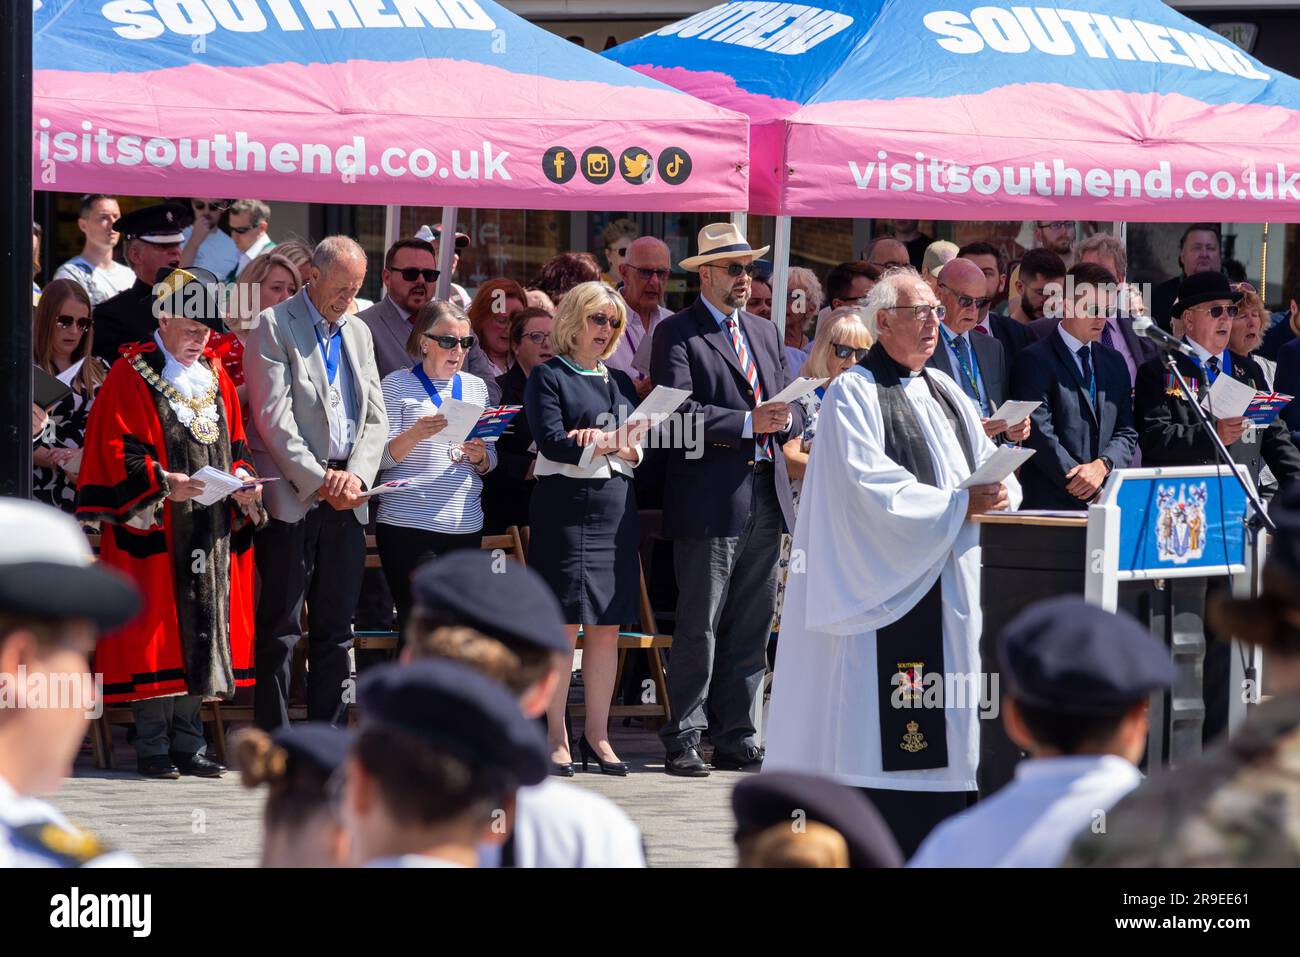 MPs Anna Firth and James Duddridge with local councillors singing at an Armed Forces Day event in the High Street, Southend on Sea, Essex, UK Stock Photo